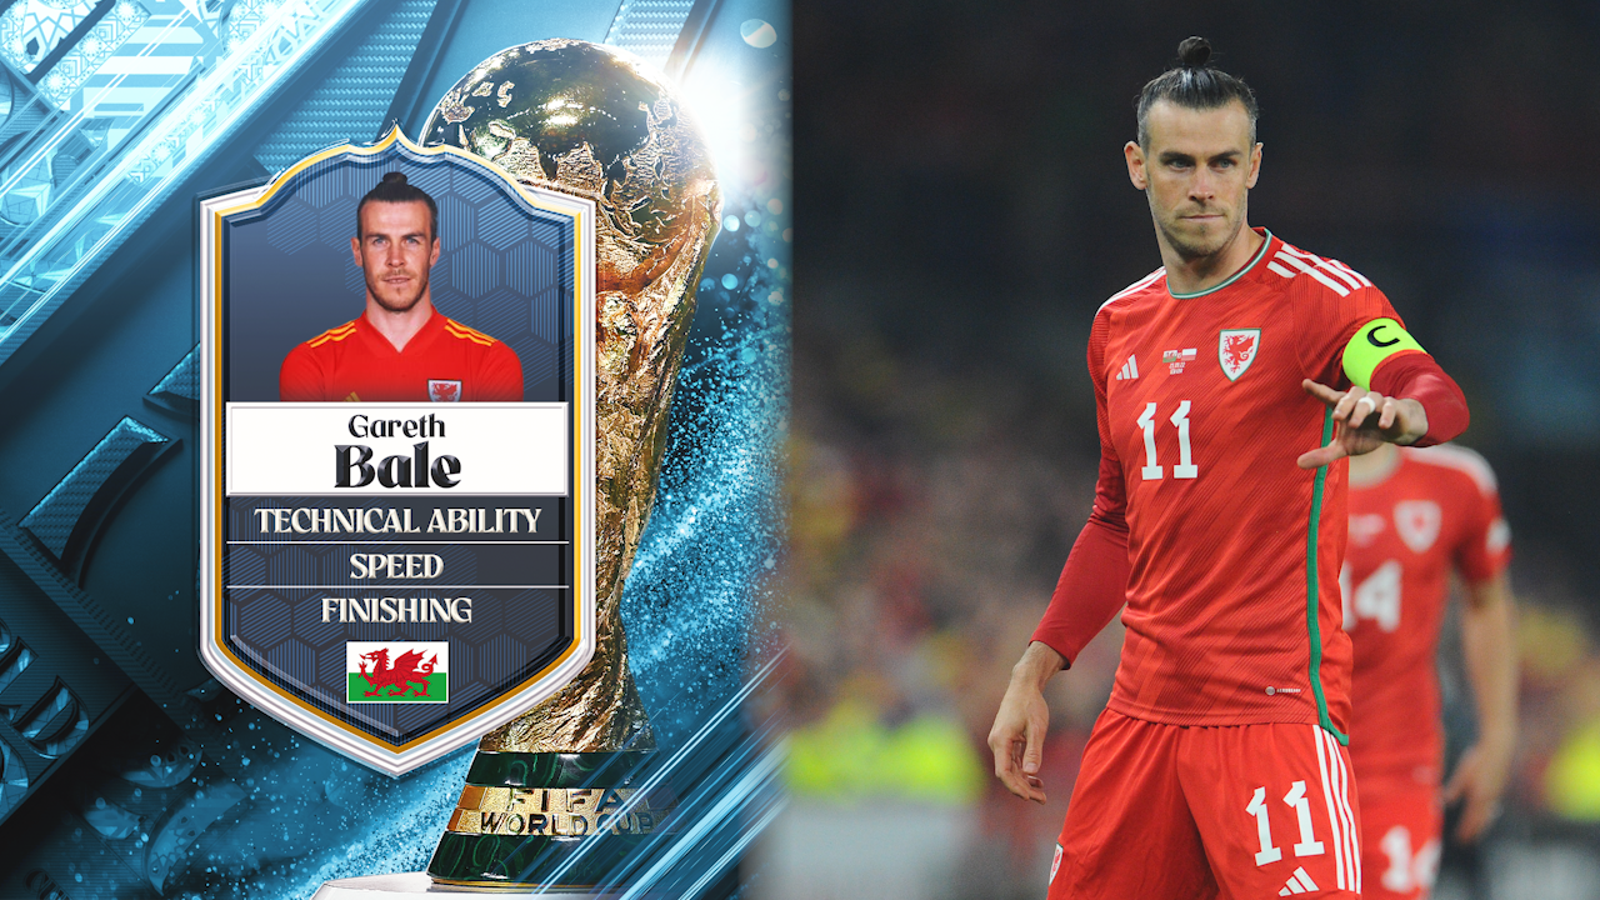 Beryl TV play-5f4d8173e000277--gareth_bale-1665356806048 2022 World Cup: USMNT can't afford to overlook Gareth Bales and Wales Sports 